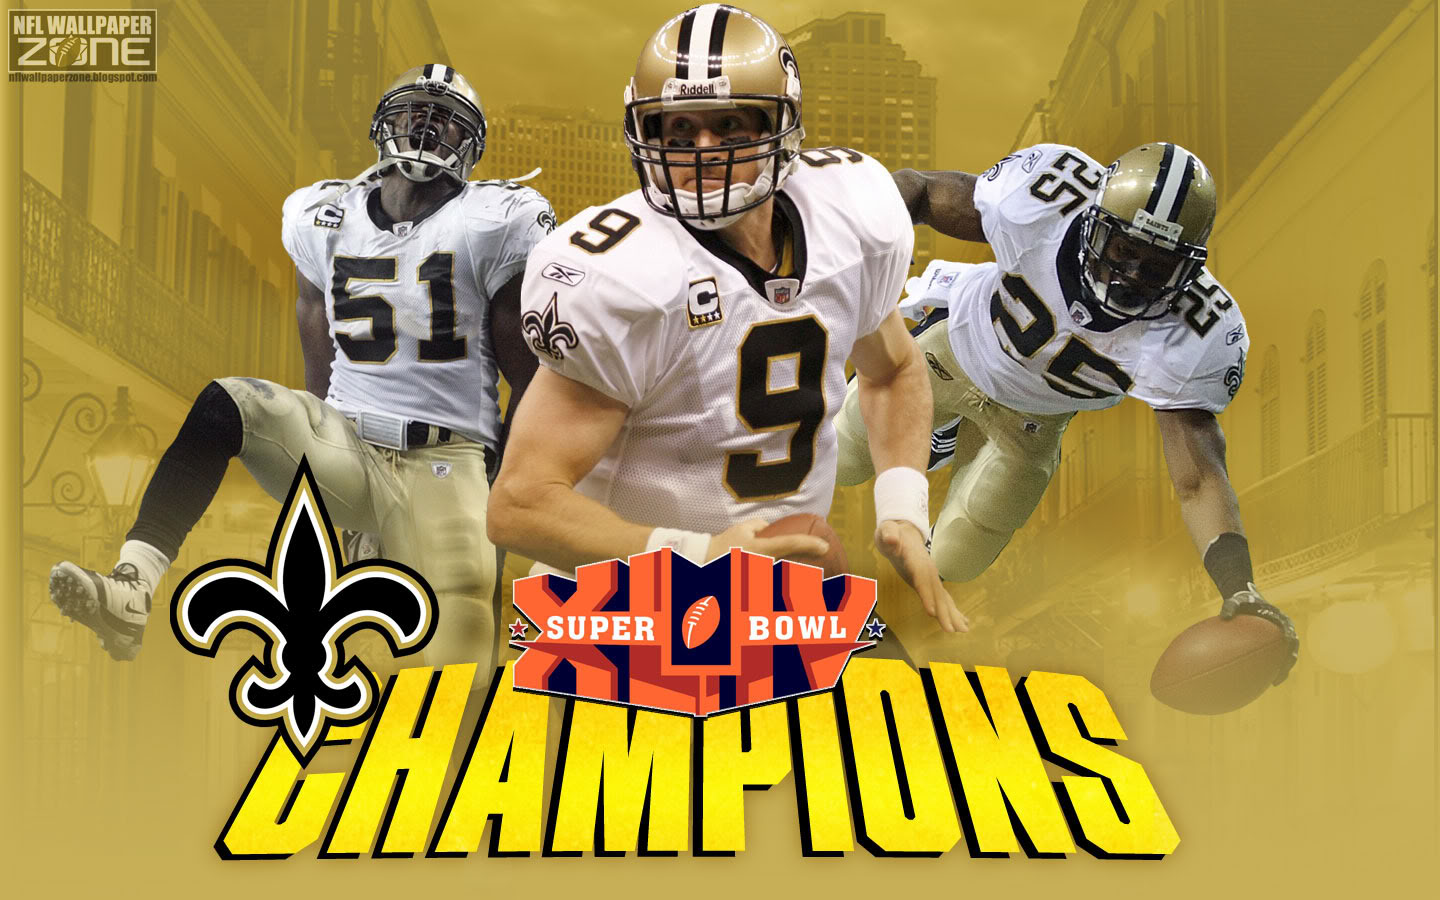 Saints Superbowl Champions Wallpape Jpg Photo By Nflwallpaperzone